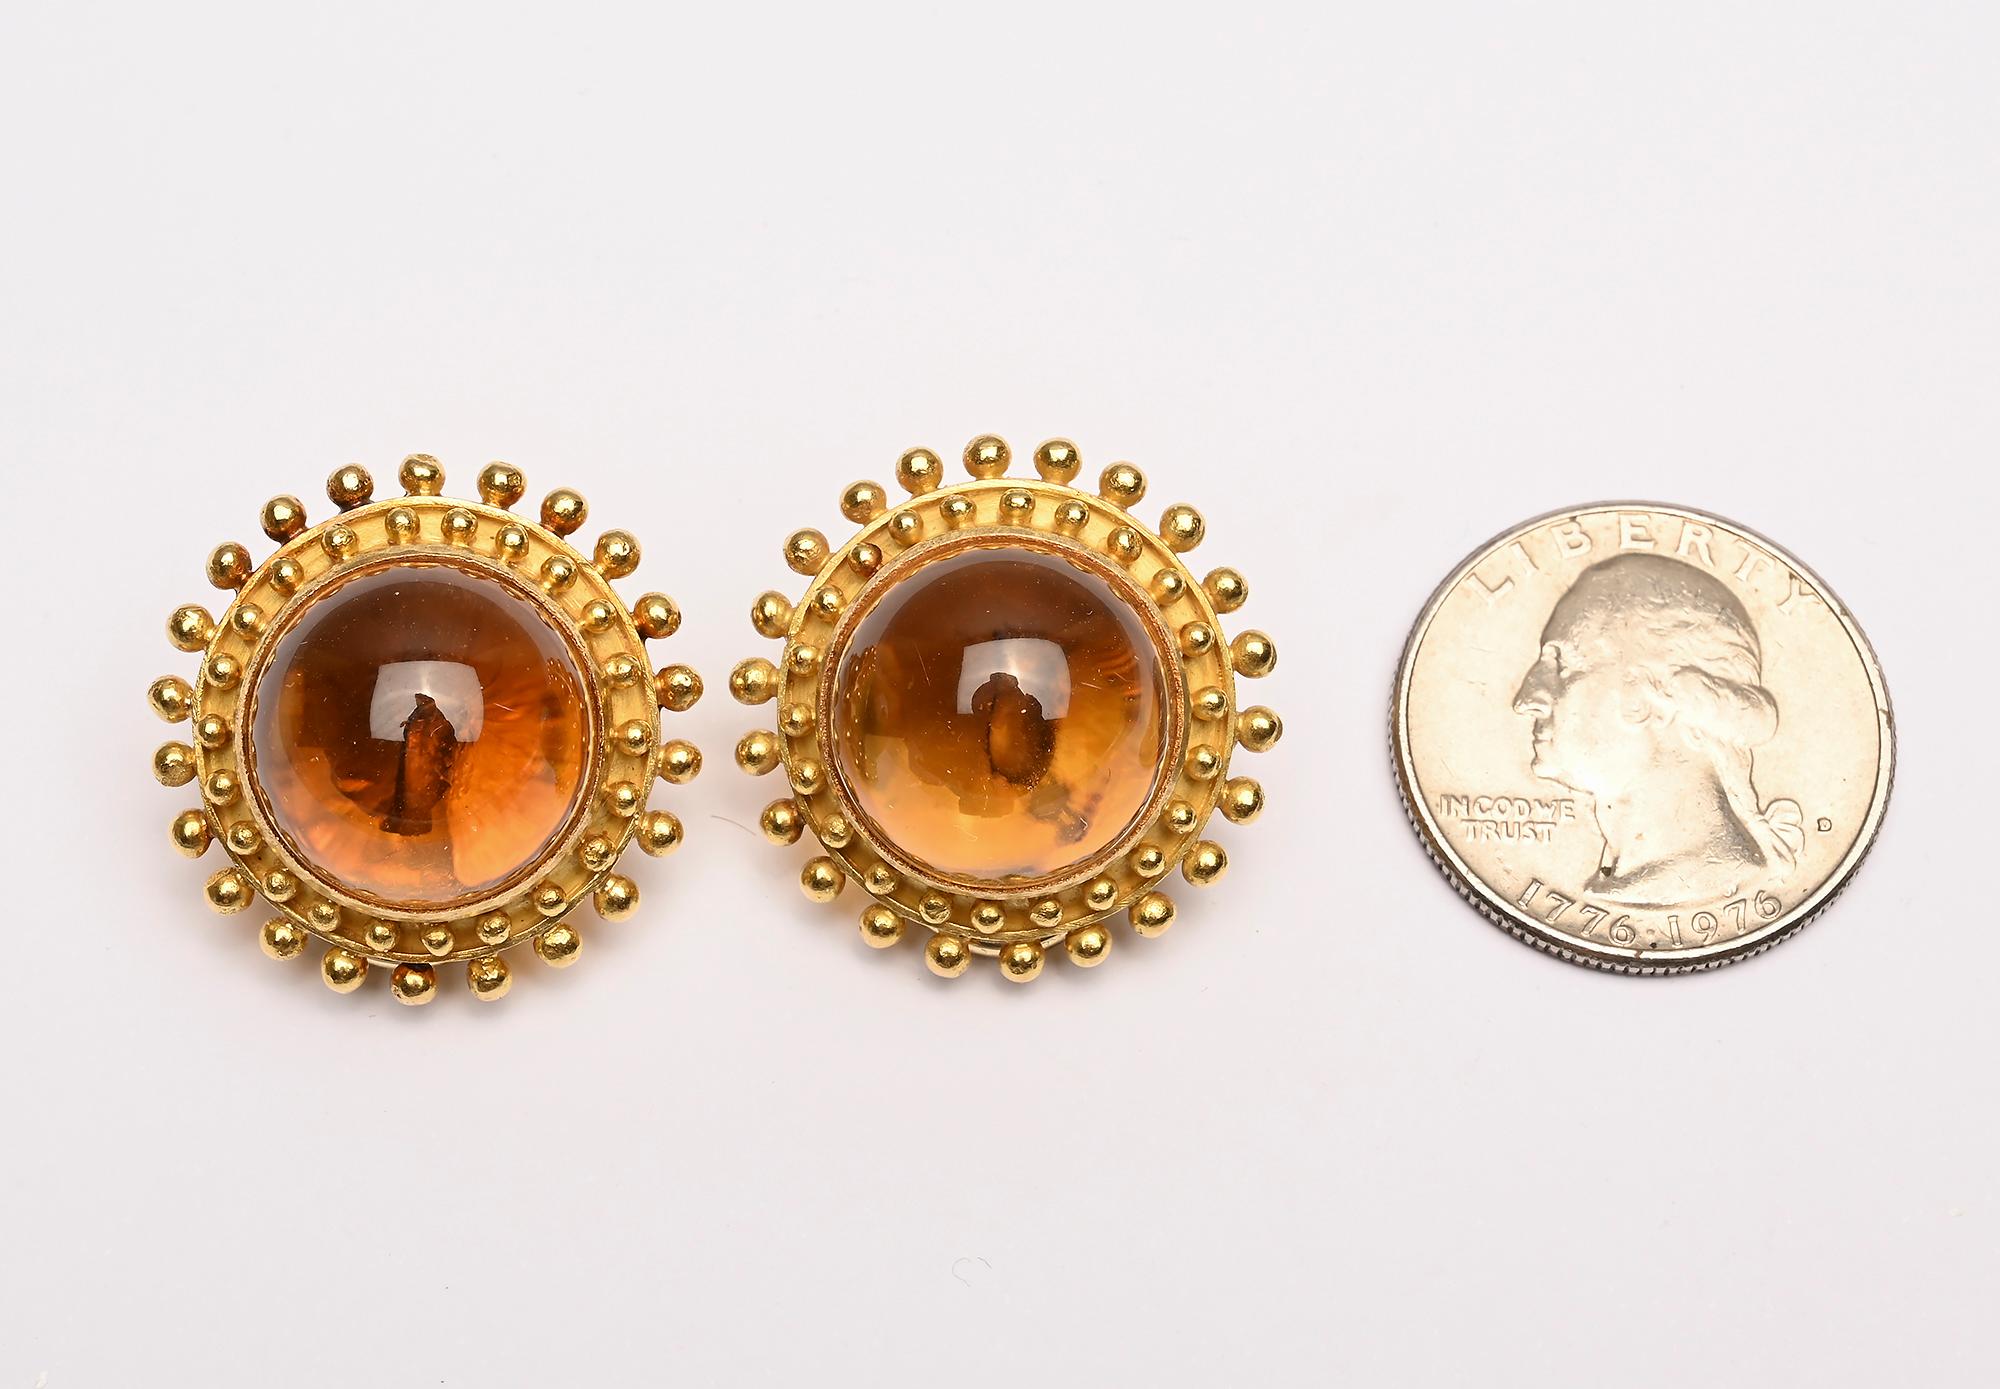 Elizabeth Locke large round earrings with a beautiful honey colored citrine. The stone is surrounded by two rows of gold beading. The earrings are 1 inch in diameter as seen photographed next to a quarter.
Backs are clips and collapsible posts.